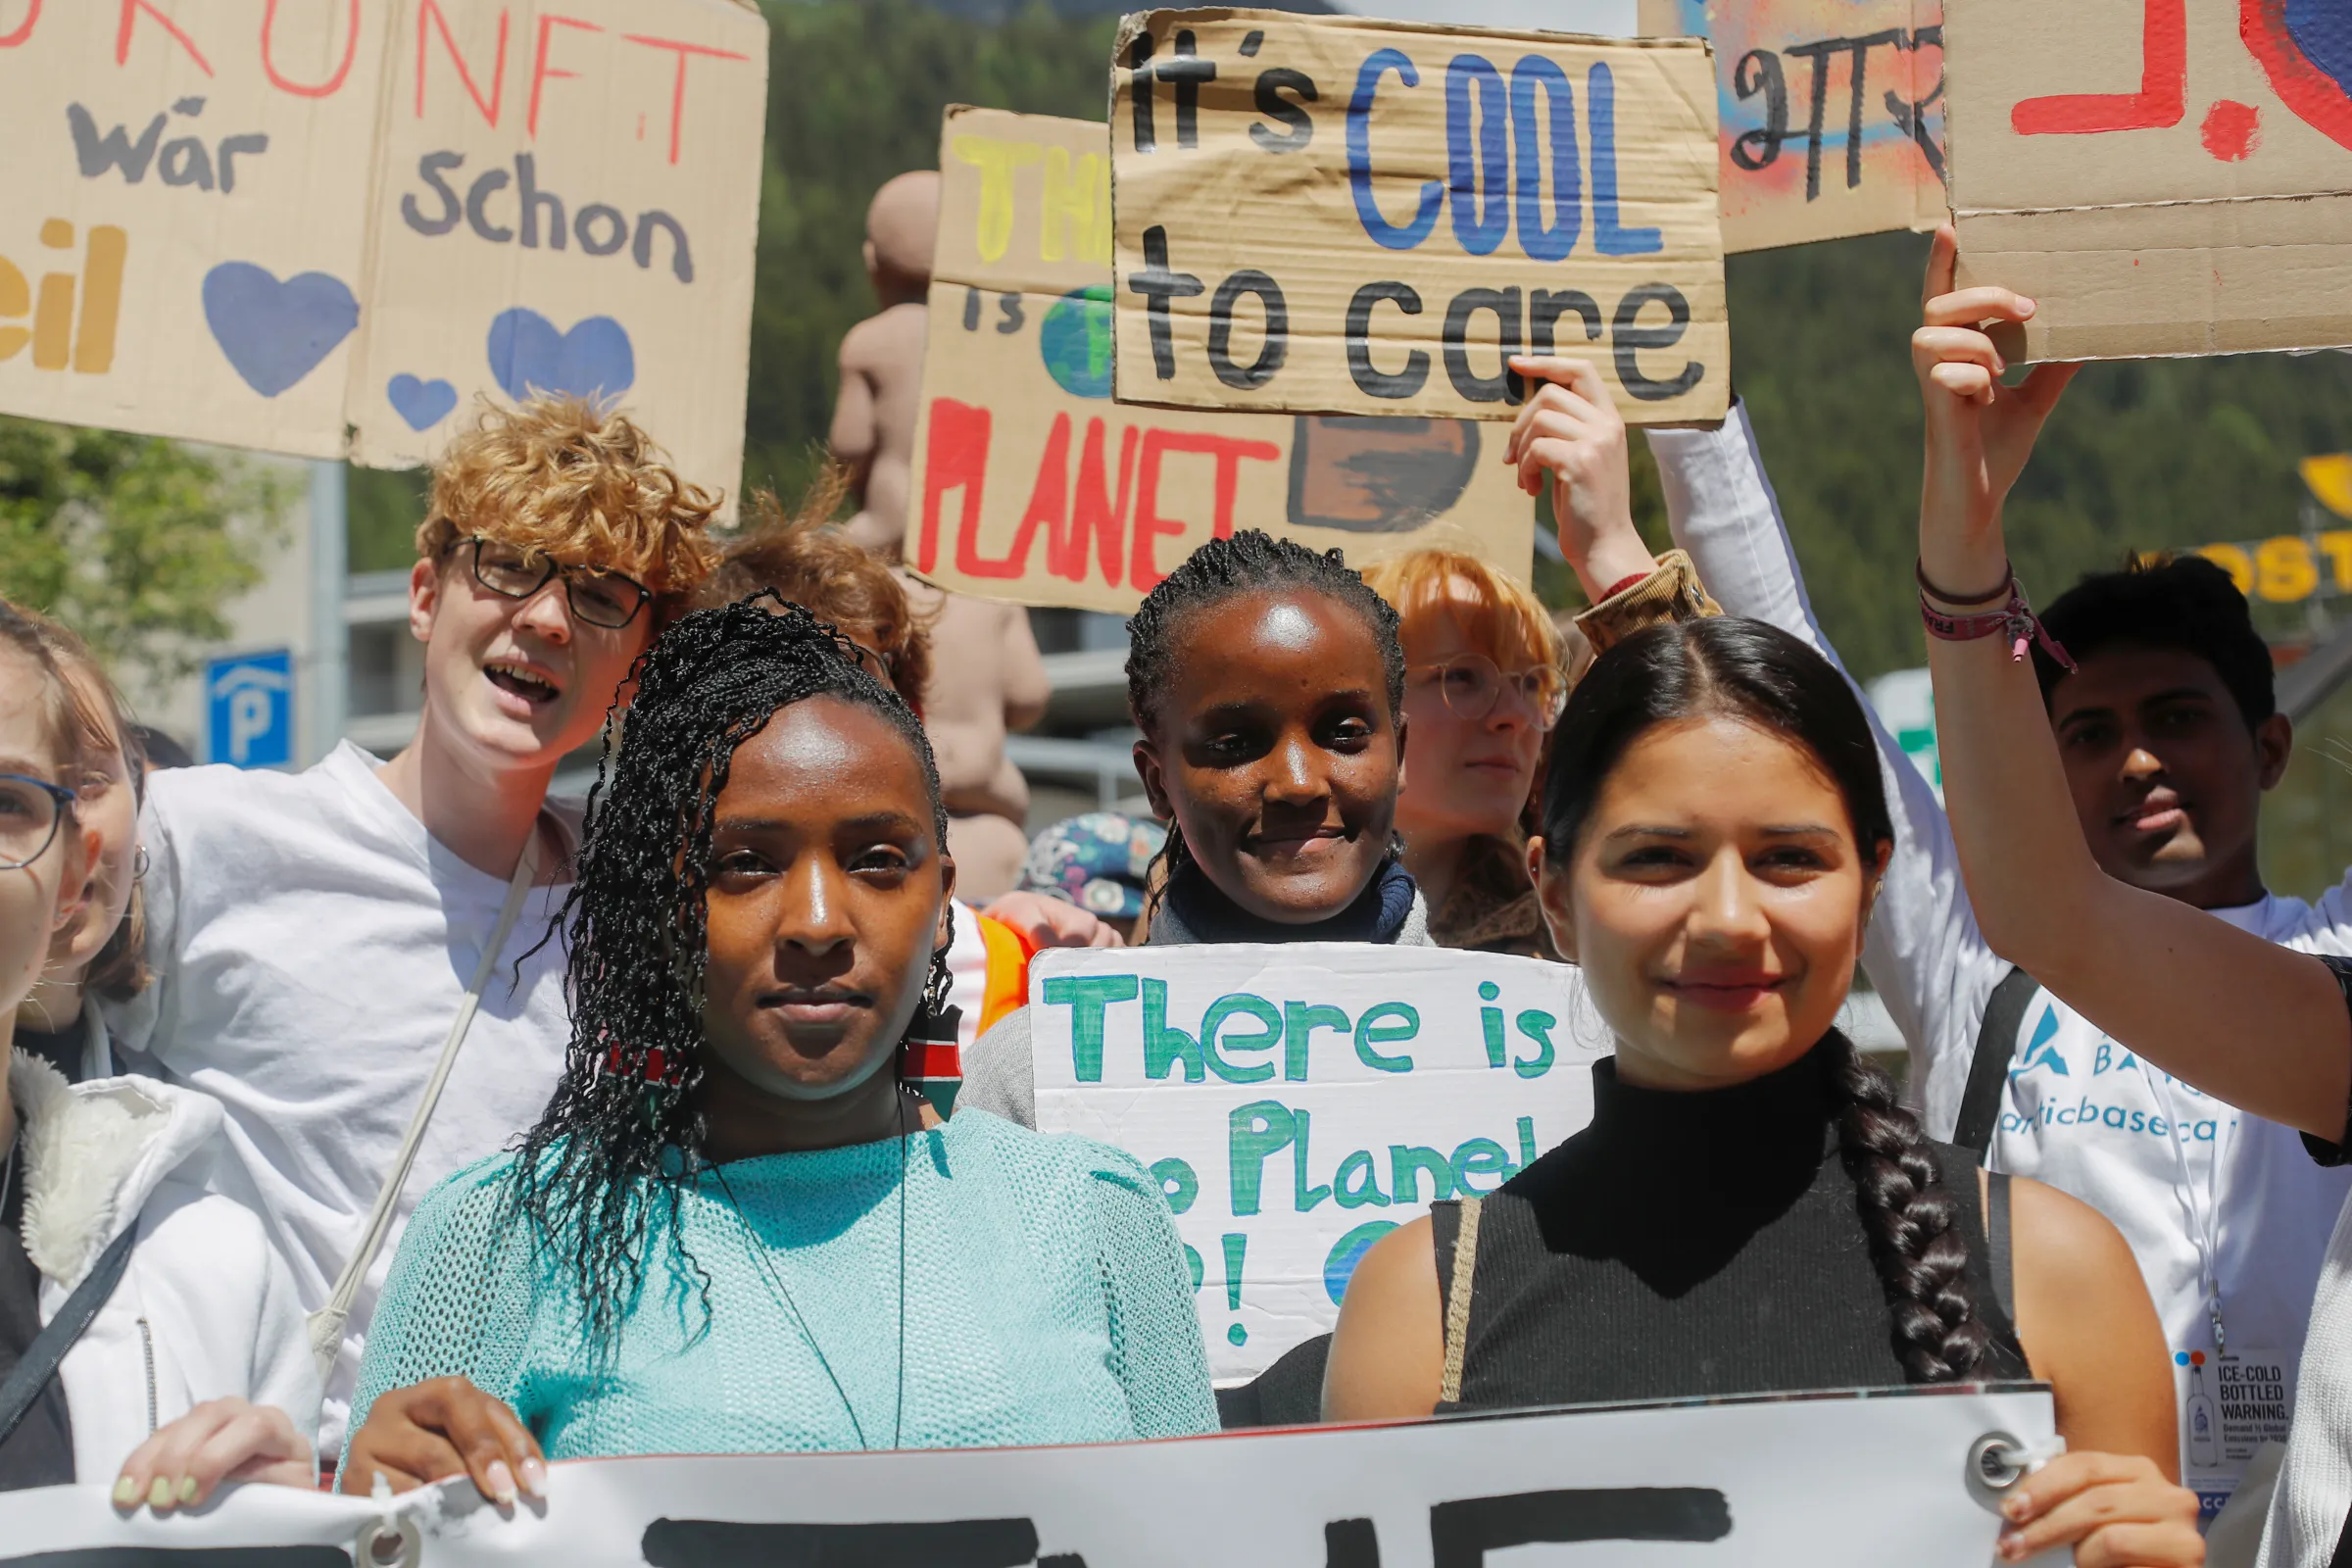 Climate activists Vanessa Nakate, Helena Gualinga and Elizabeth Wathuti hold signs, during a Fridays for Future climate strike on the last day of the World Economic Forum (WEF), in the alpine resort of Davos, Switzerland May 26, 2022. REUTERS/Arnd Wiegmann